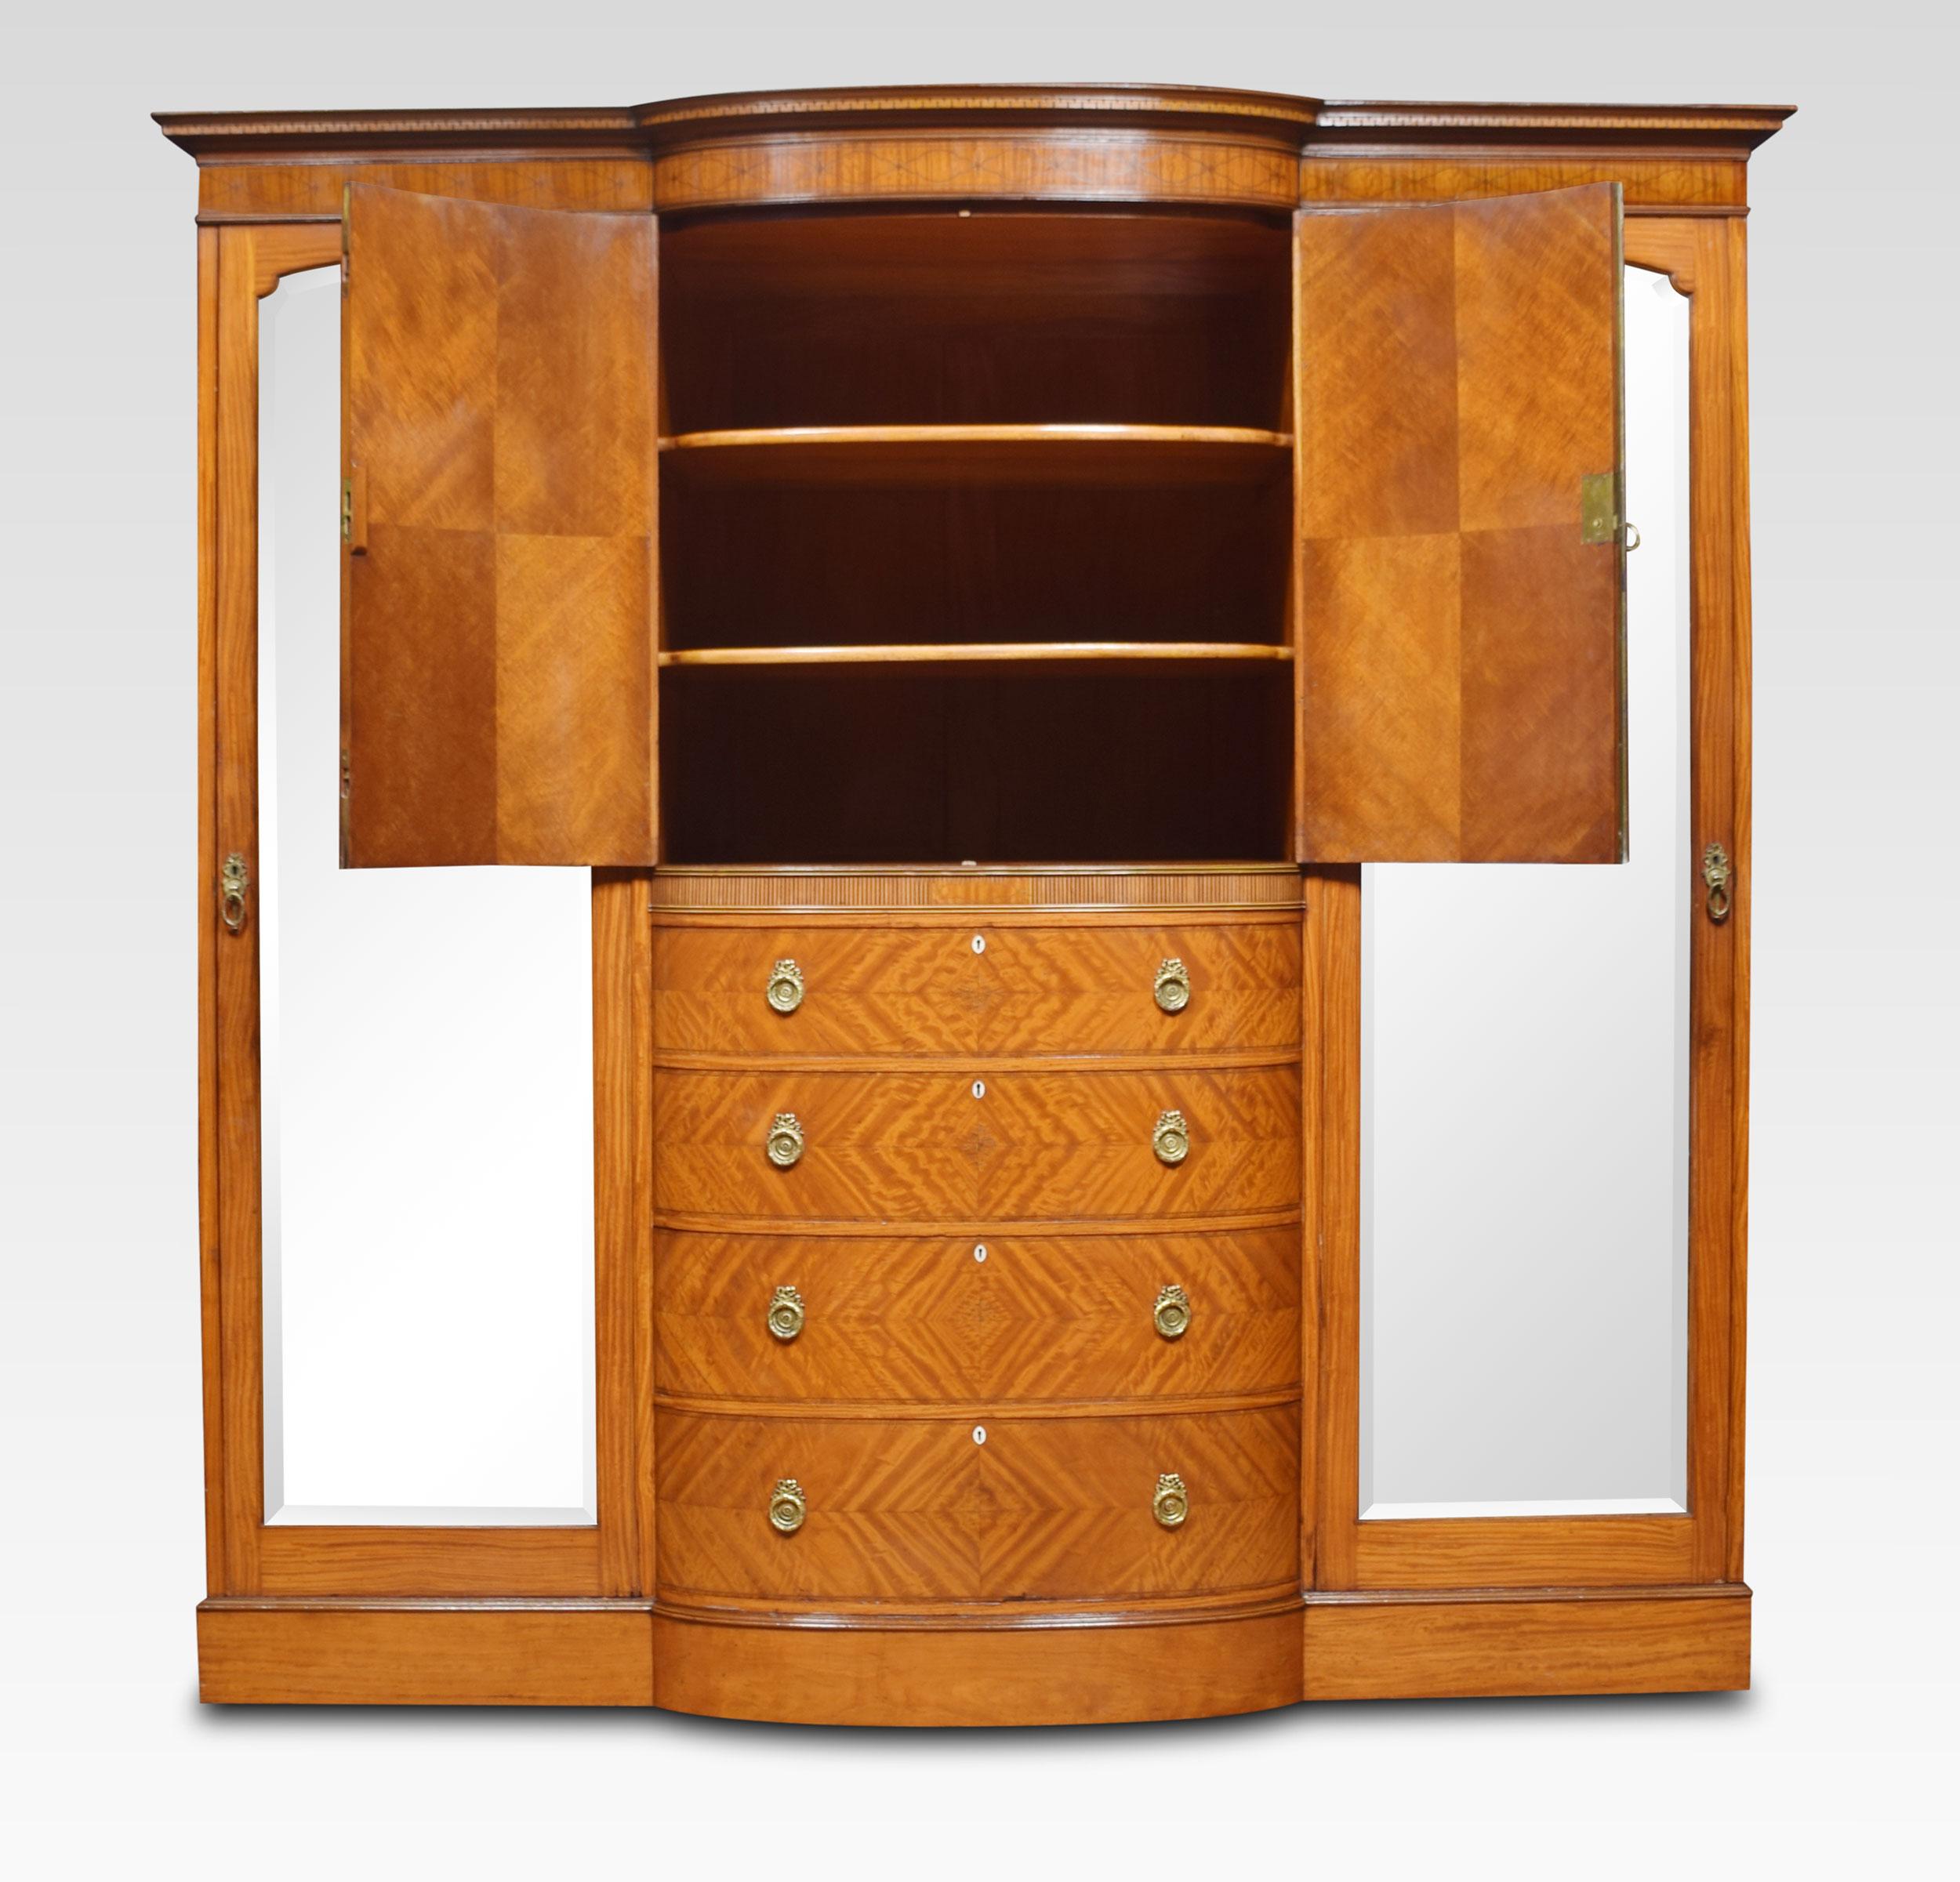 Late 19th century Sheraton Revival bow-fronted compactum wardrobe, the detachable decorated cornice above a central cupboard fitted with bow-fronted shelves enclosed by a pair of floral inlaid panel doors. Above four long graduated drawers. Flanked